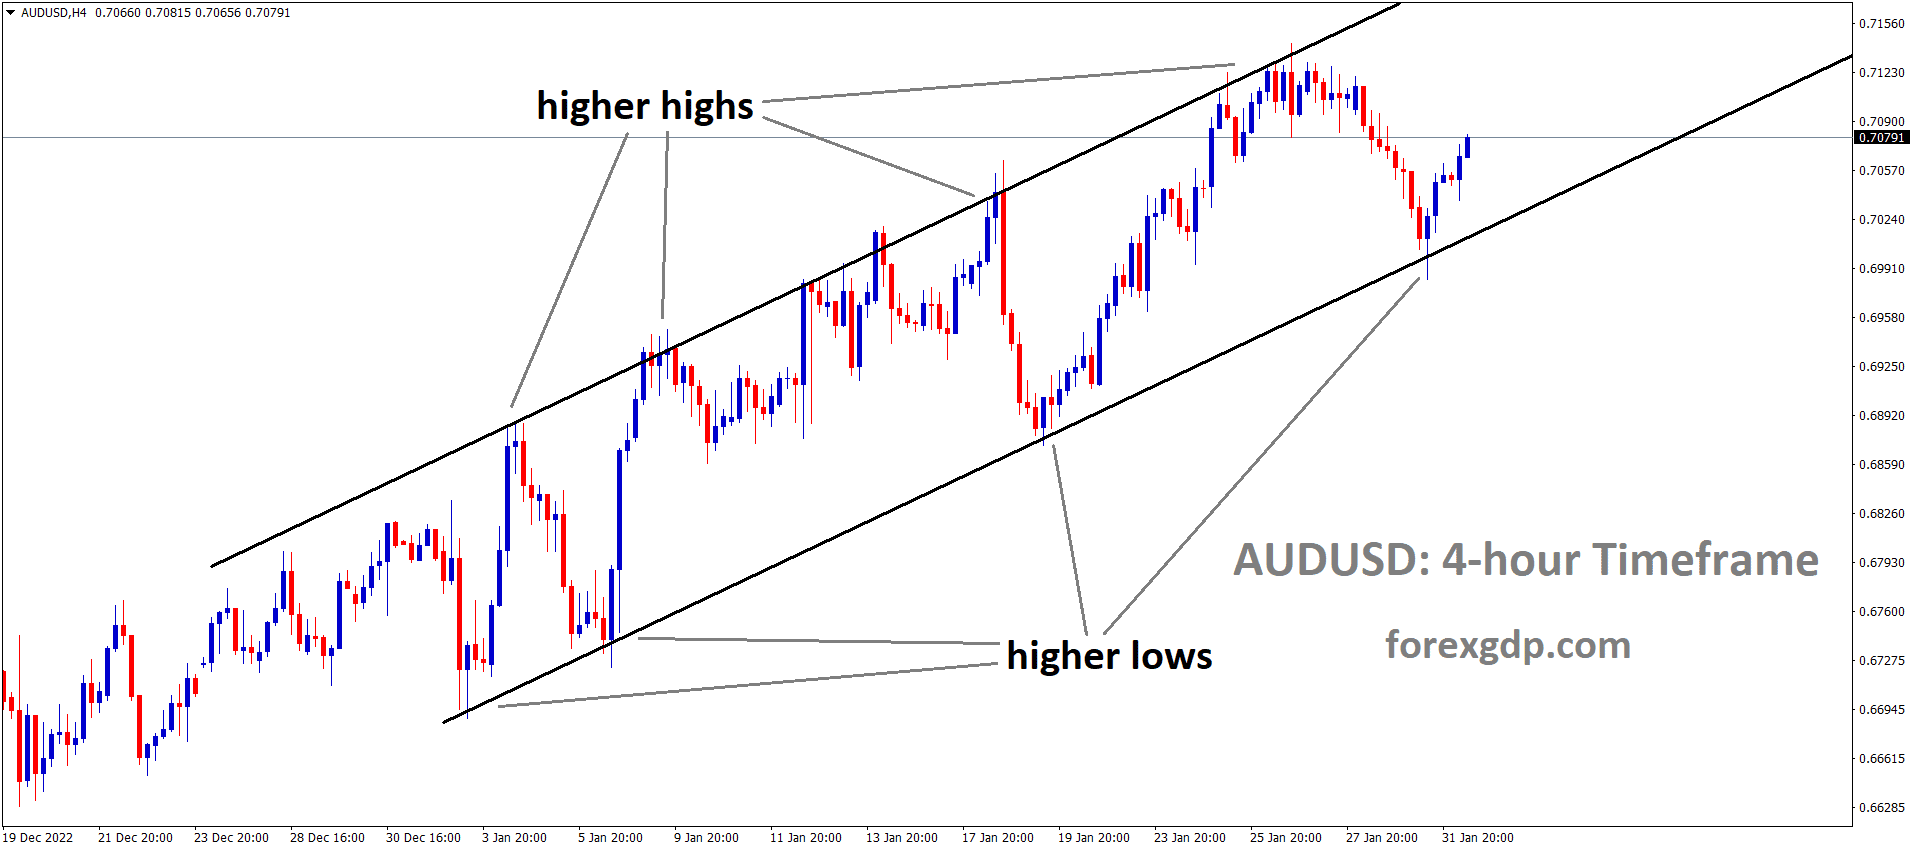 AUDUSD H4 TF analysis Market is moving in an Ascending channel and the market has rebounded from the higher low area of the channel